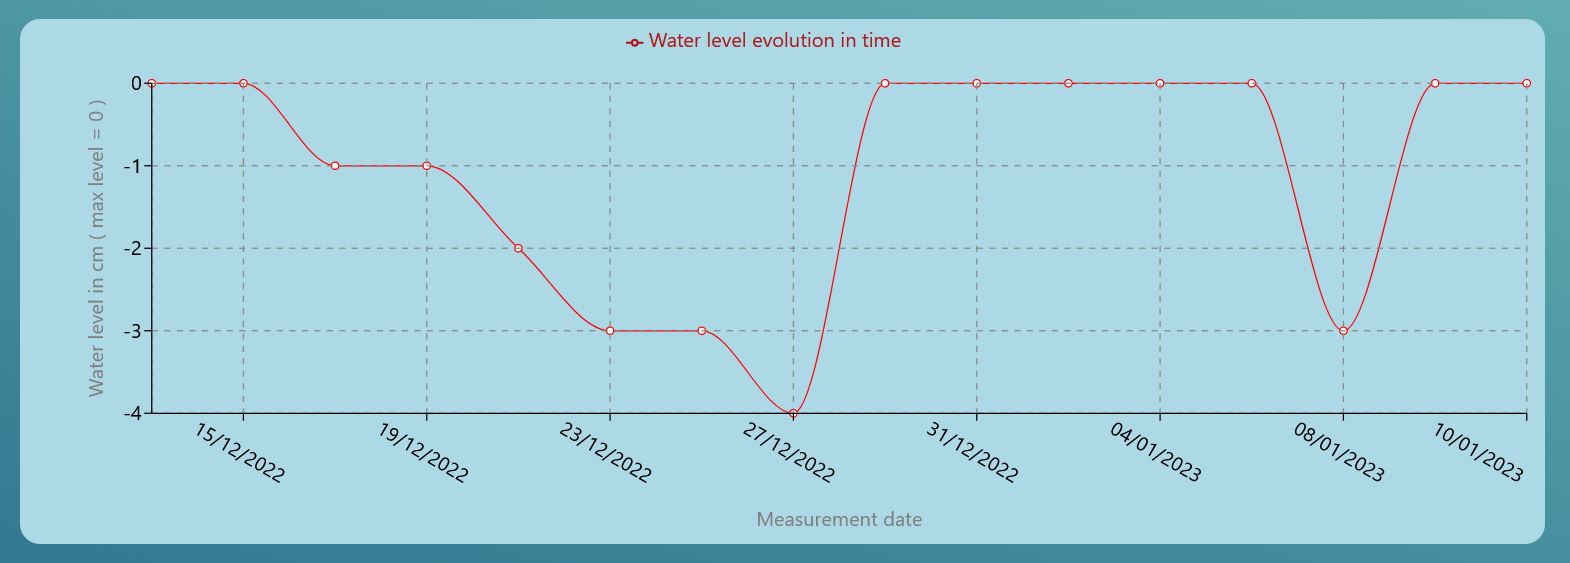  Water level history in the web page